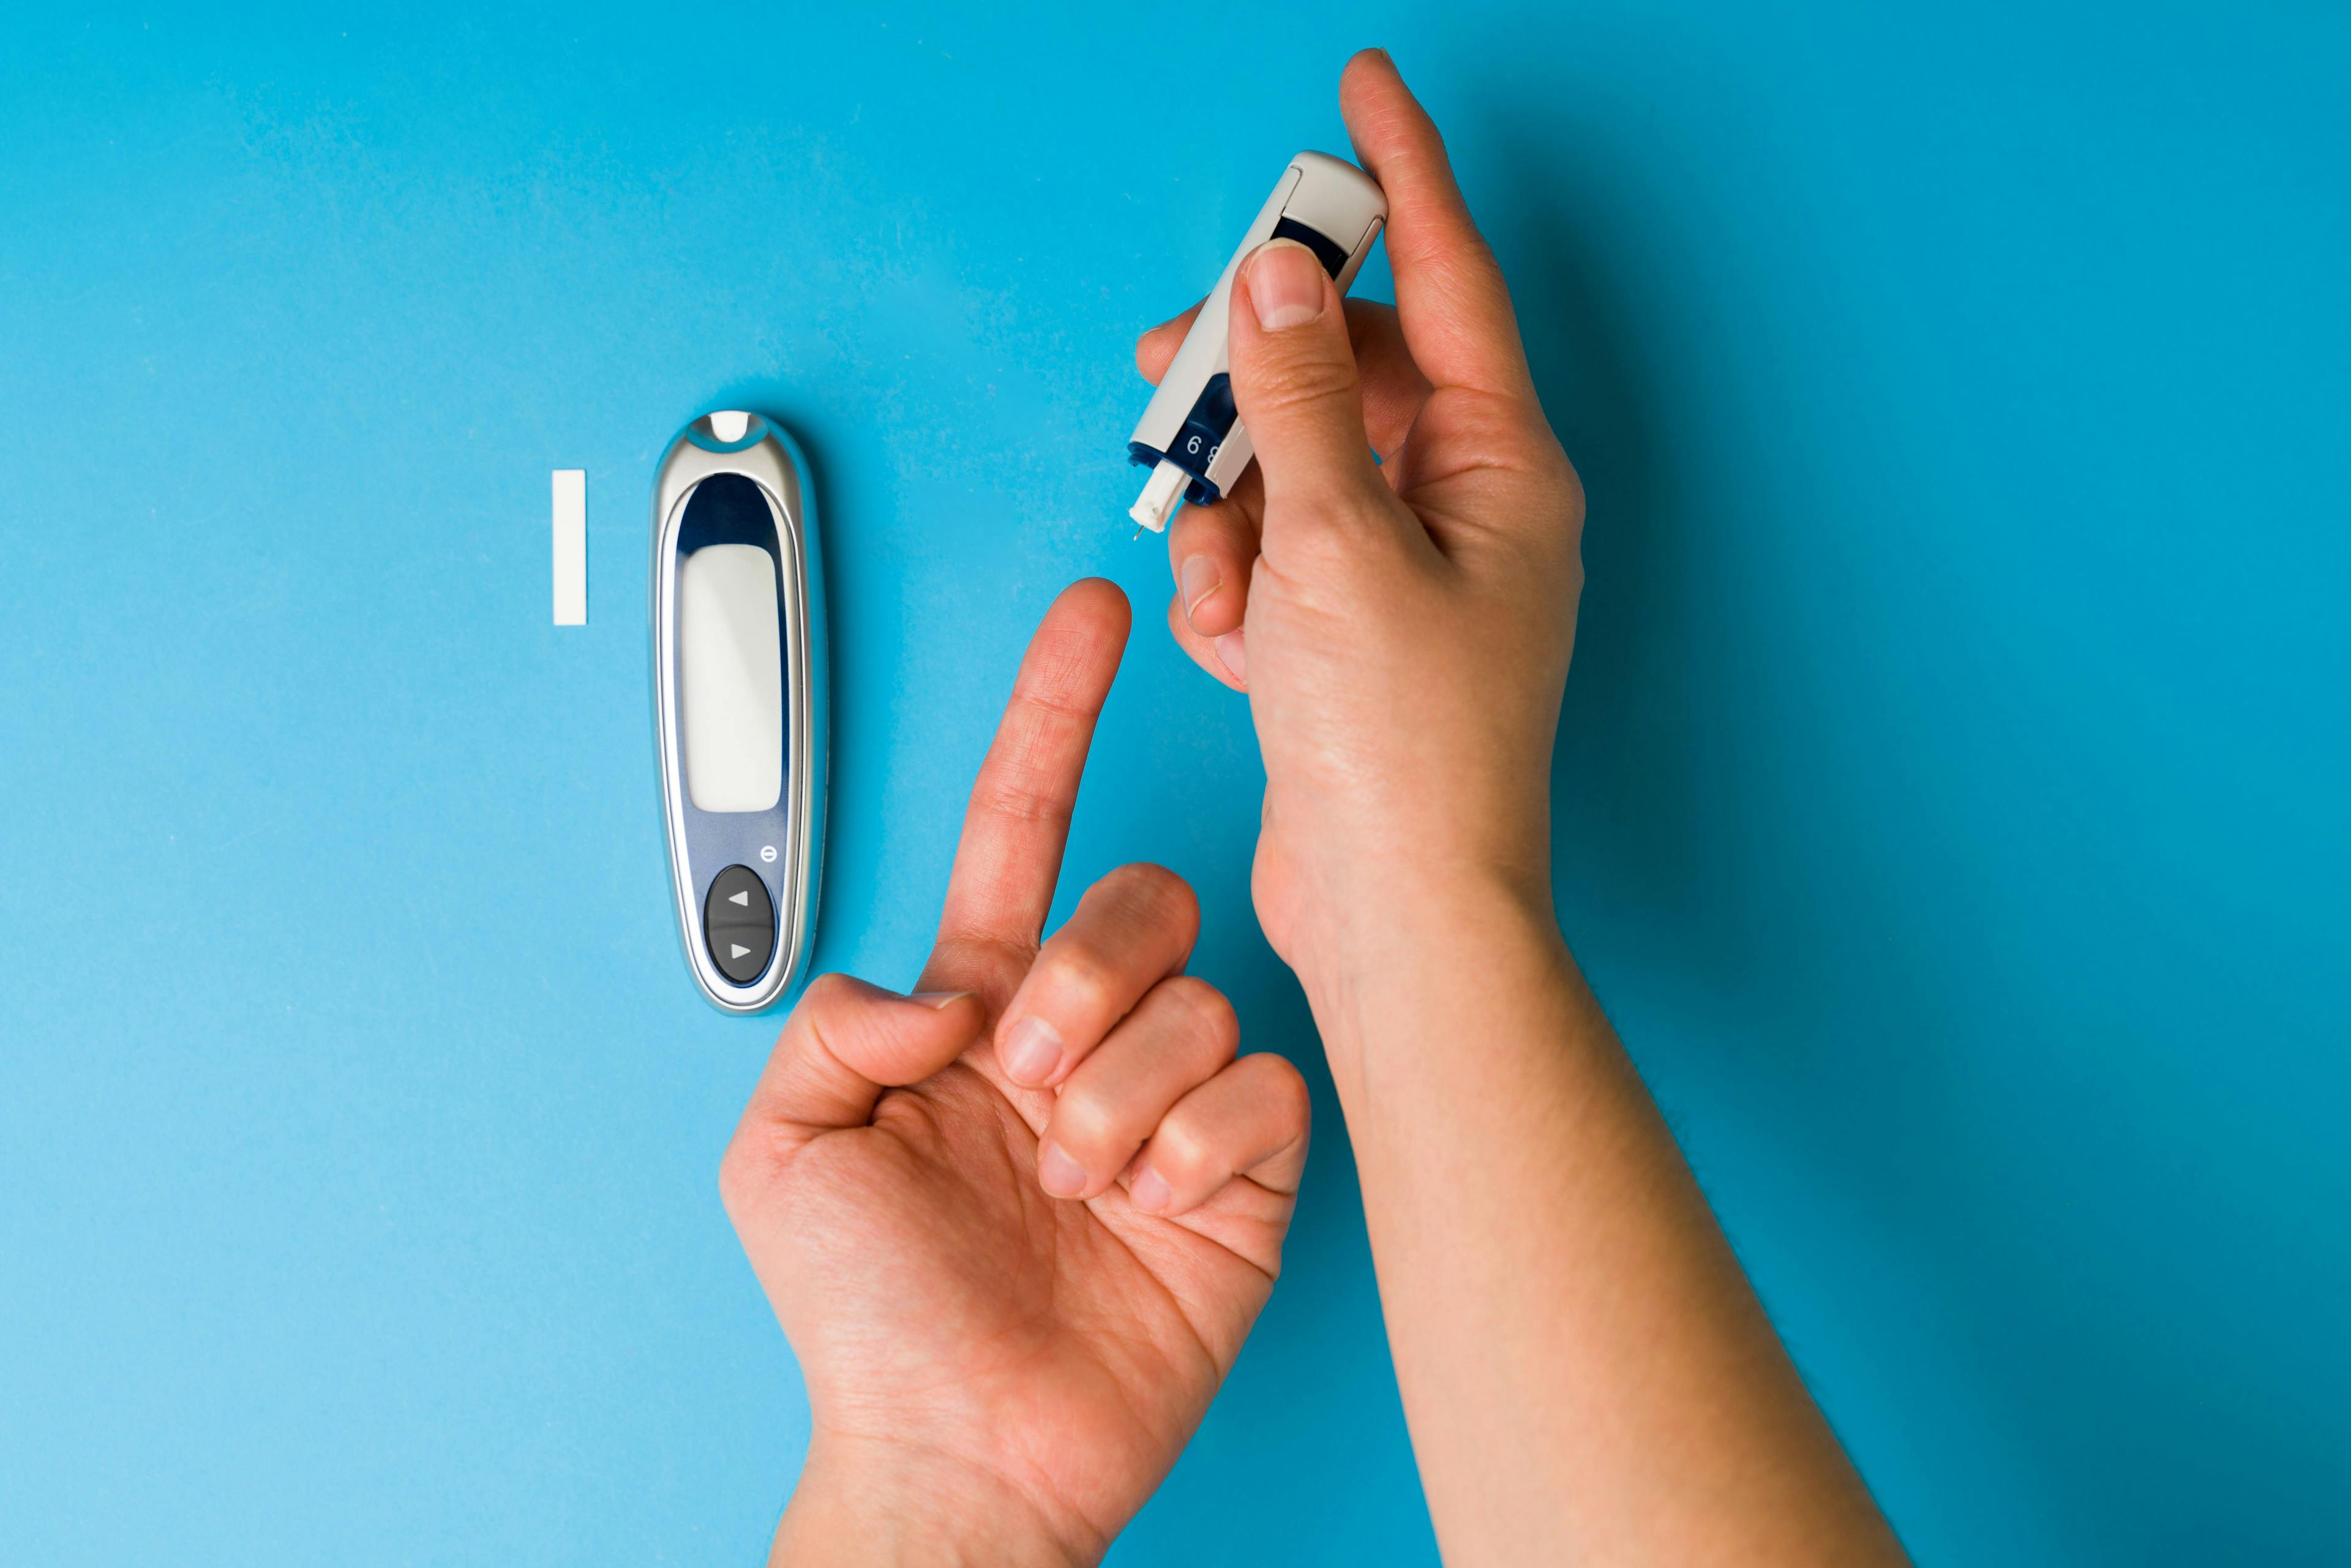 Patient with T2D self-monitoring glucose levels / AntonioDiaz - stock.adobe.com